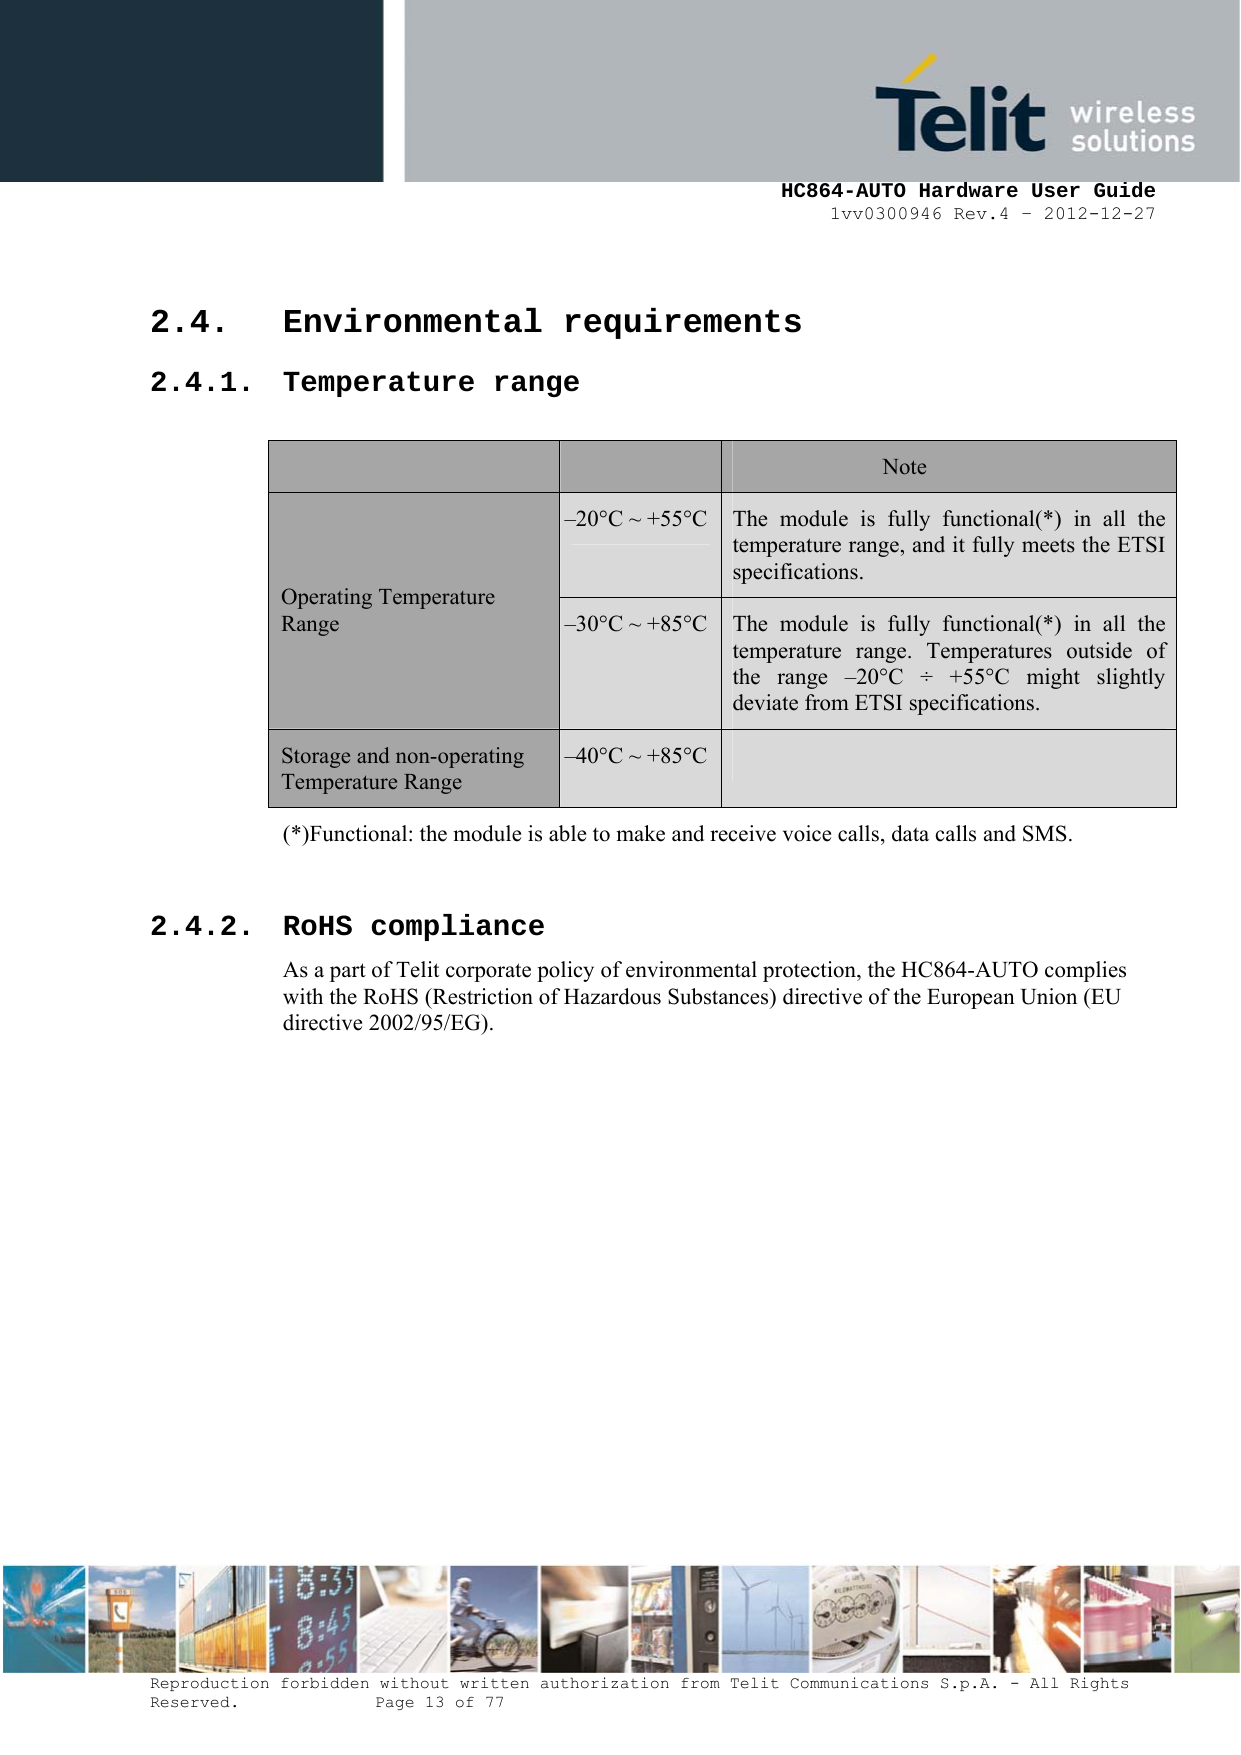     HC864-AUTO Hardware User Guide 1vv0300946 Rev.4 – 2012-12-27 Reproduction forbidden without written authorization from Telit Communications S.p.A. - All Rights Reserved.    Page 13 of 77  2.4. Environmental requirements 2.4.1. Temperature range  Note –20°C ~ +55°C The module is fully functional(*) in all the temperature range, and it fully meets the ETSI specifications. Operating Temperature Range  –30°C ~ +85°C The module is fully functional(*) in all the temperature range. Temperatures outside of the range –20°C ÷ +55°C might slightly deviate from ETSI specifications. Storage and non-operating Temperature Range –40°C ~ +85°C  (*)Functional: the module is able to make and receive voice calls, data calls and SMS.  2.4.2. RoHS compliance As a part of Telit corporate policy of environmental protection, the HC864-AUTO complies with the RoHS (Restriction of Hazardous Substances) directive of the European Union (EU directive 2002/95/EG). 